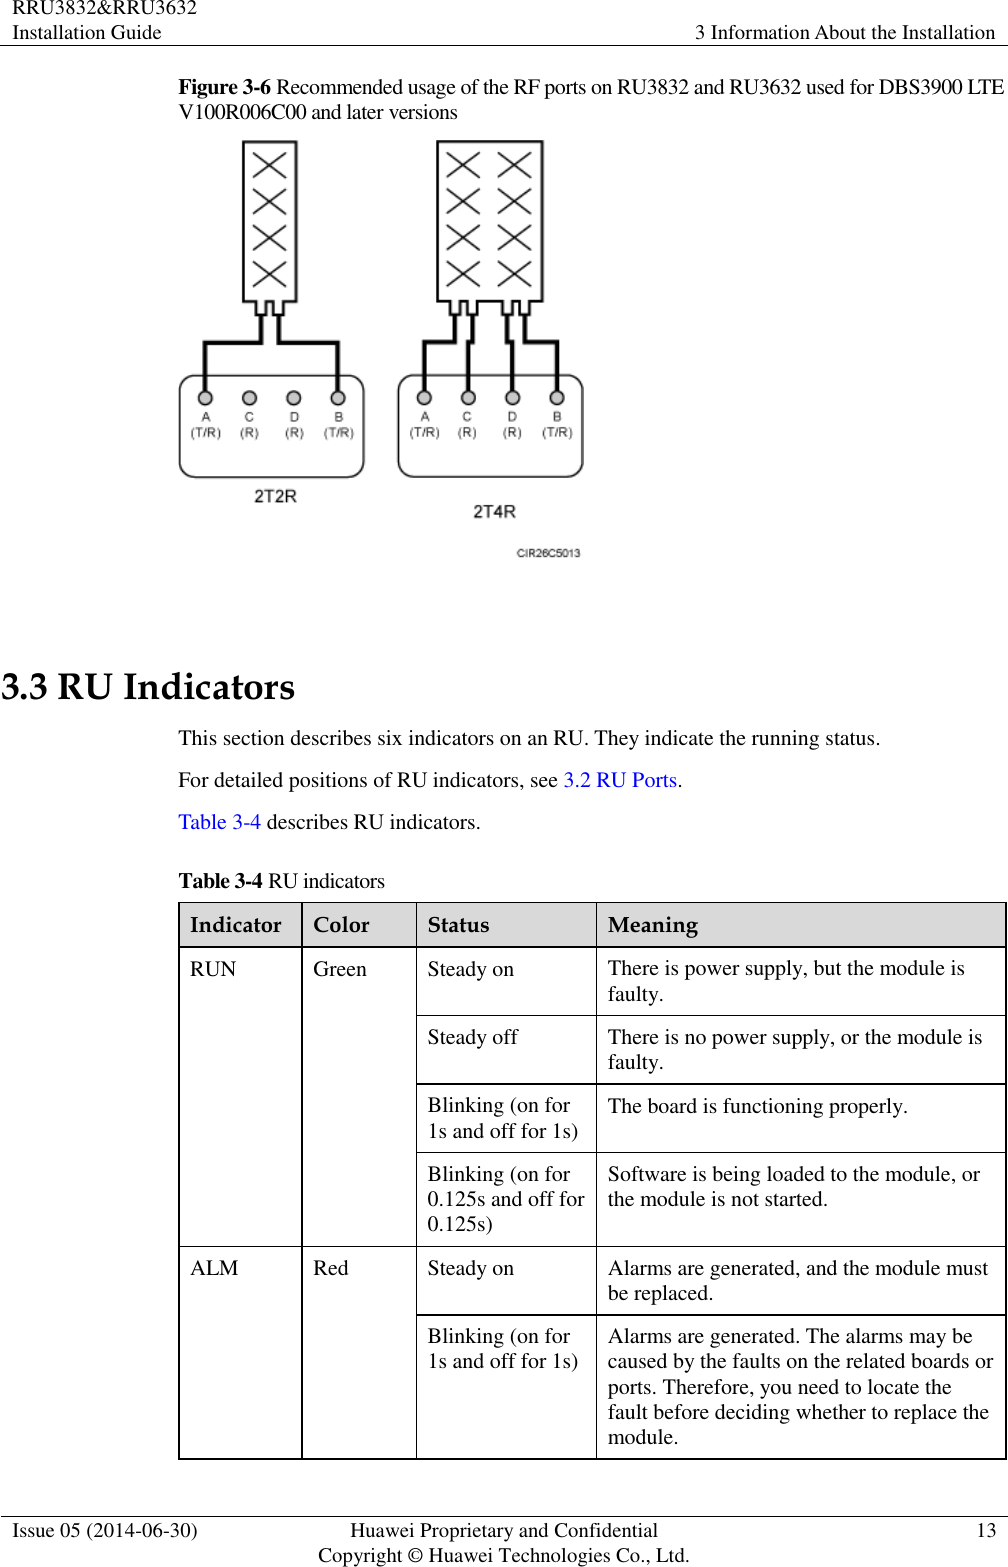 RRU3832&amp;RRU3632 Installation Guide 3 Information About the Installation  Issue 05 (2014-06-30) Huawei Proprietary and Confidential                                     Copyright © Huawei Technologies Co., Ltd. 13  Figure 3-6 Recommended usage of the RF ports on RU3832 and RU3632 used for DBS3900 LTE V100R006C00 and later versions   3.3 RU Indicators This section describes six indicators on an RU. They indicate the running status.   For detailed positions of RU indicators, see 3.2 RU Ports. Table 3-4 describes RU indicators. Table 3-4 RU indicators Indicator Color Status Meaning RUN Green Steady on There is power supply, but the module is faulty. Steady off There is no power supply, or the module is faulty. Blinking (on for 1s and off for 1s) The board is functioning properly. Blinking (on for 0.125s and off for 0.125s) Software is being loaded to the module, or the module is not started. ALM Red Steady on Alarms are generated, and the module must be replaced. Blinking (on for 1s and off for 1s) Alarms are generated. The alarms may be caused by the faults on the related boards or ports. Therefore, you need to locate the fault before deciding whether to replace the module. 